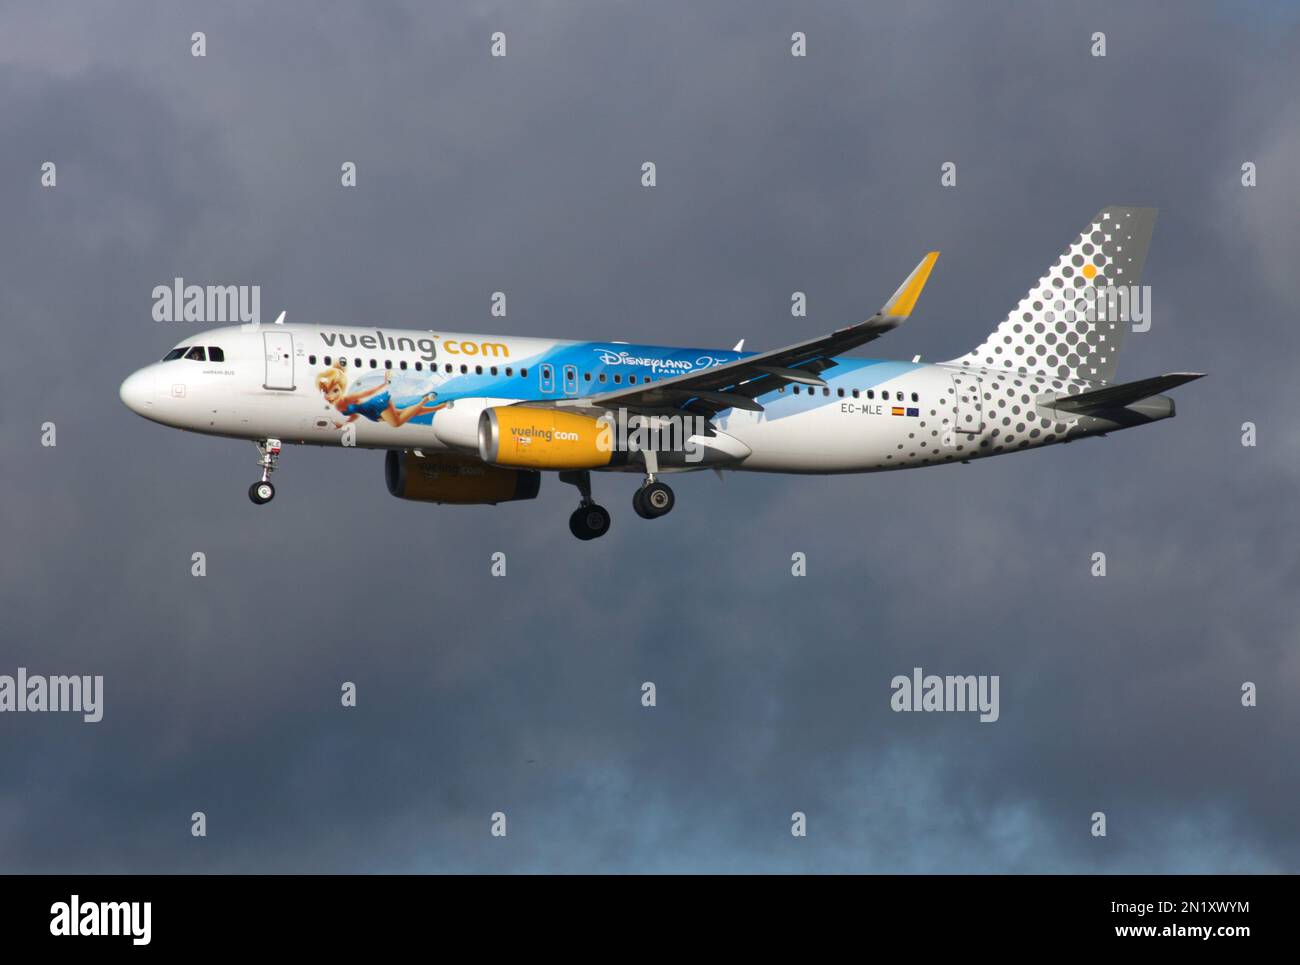 An Airbus A320 of Vueling in a special scheme Disneyland Paris 25 Years arriving at London Gatwick Airport Stock Photo